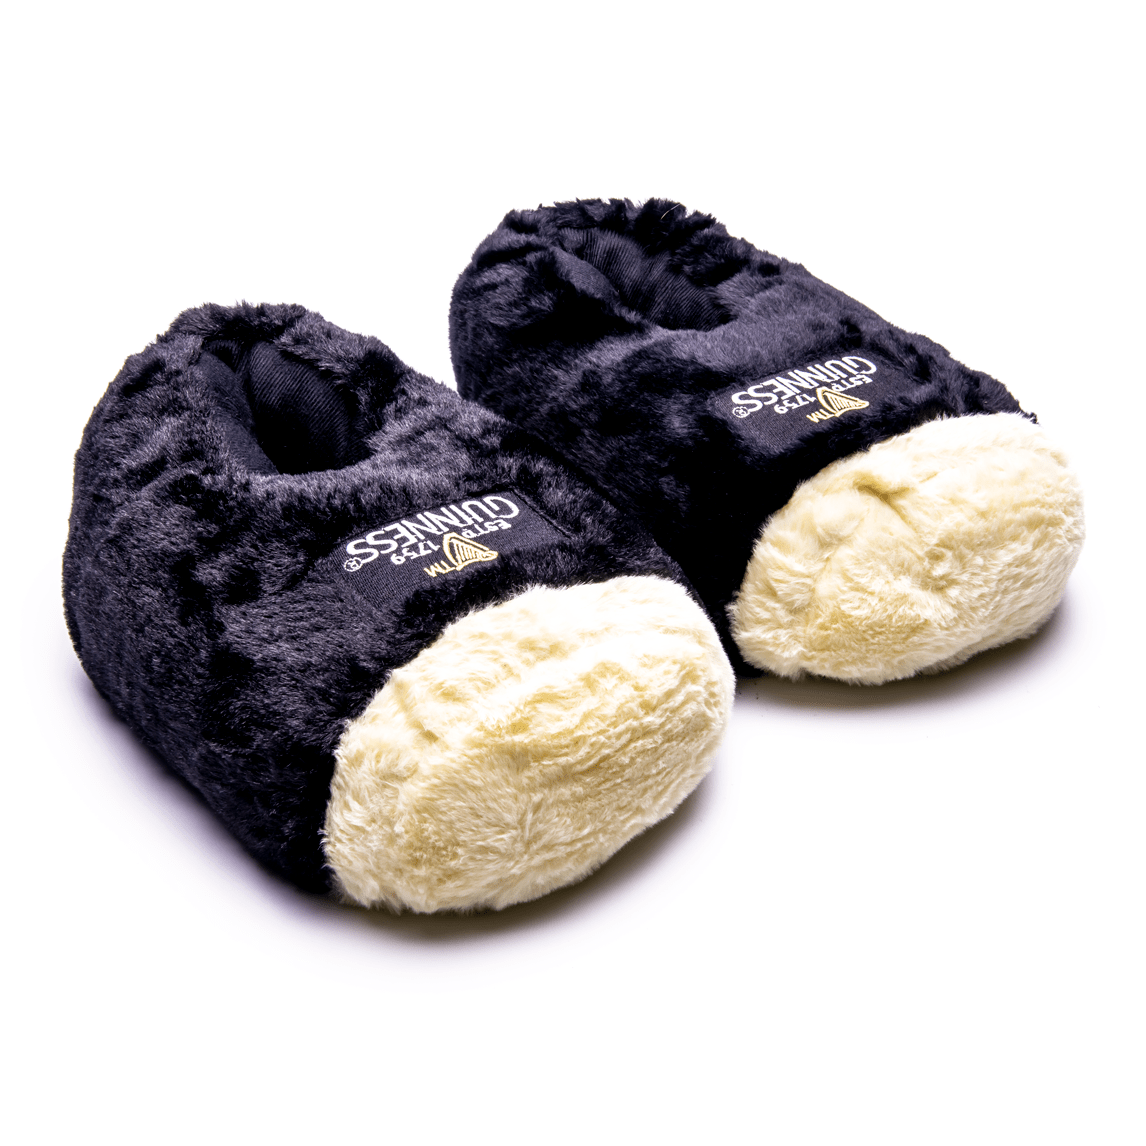 A pair of Guinness Pint Slippers on a white background.